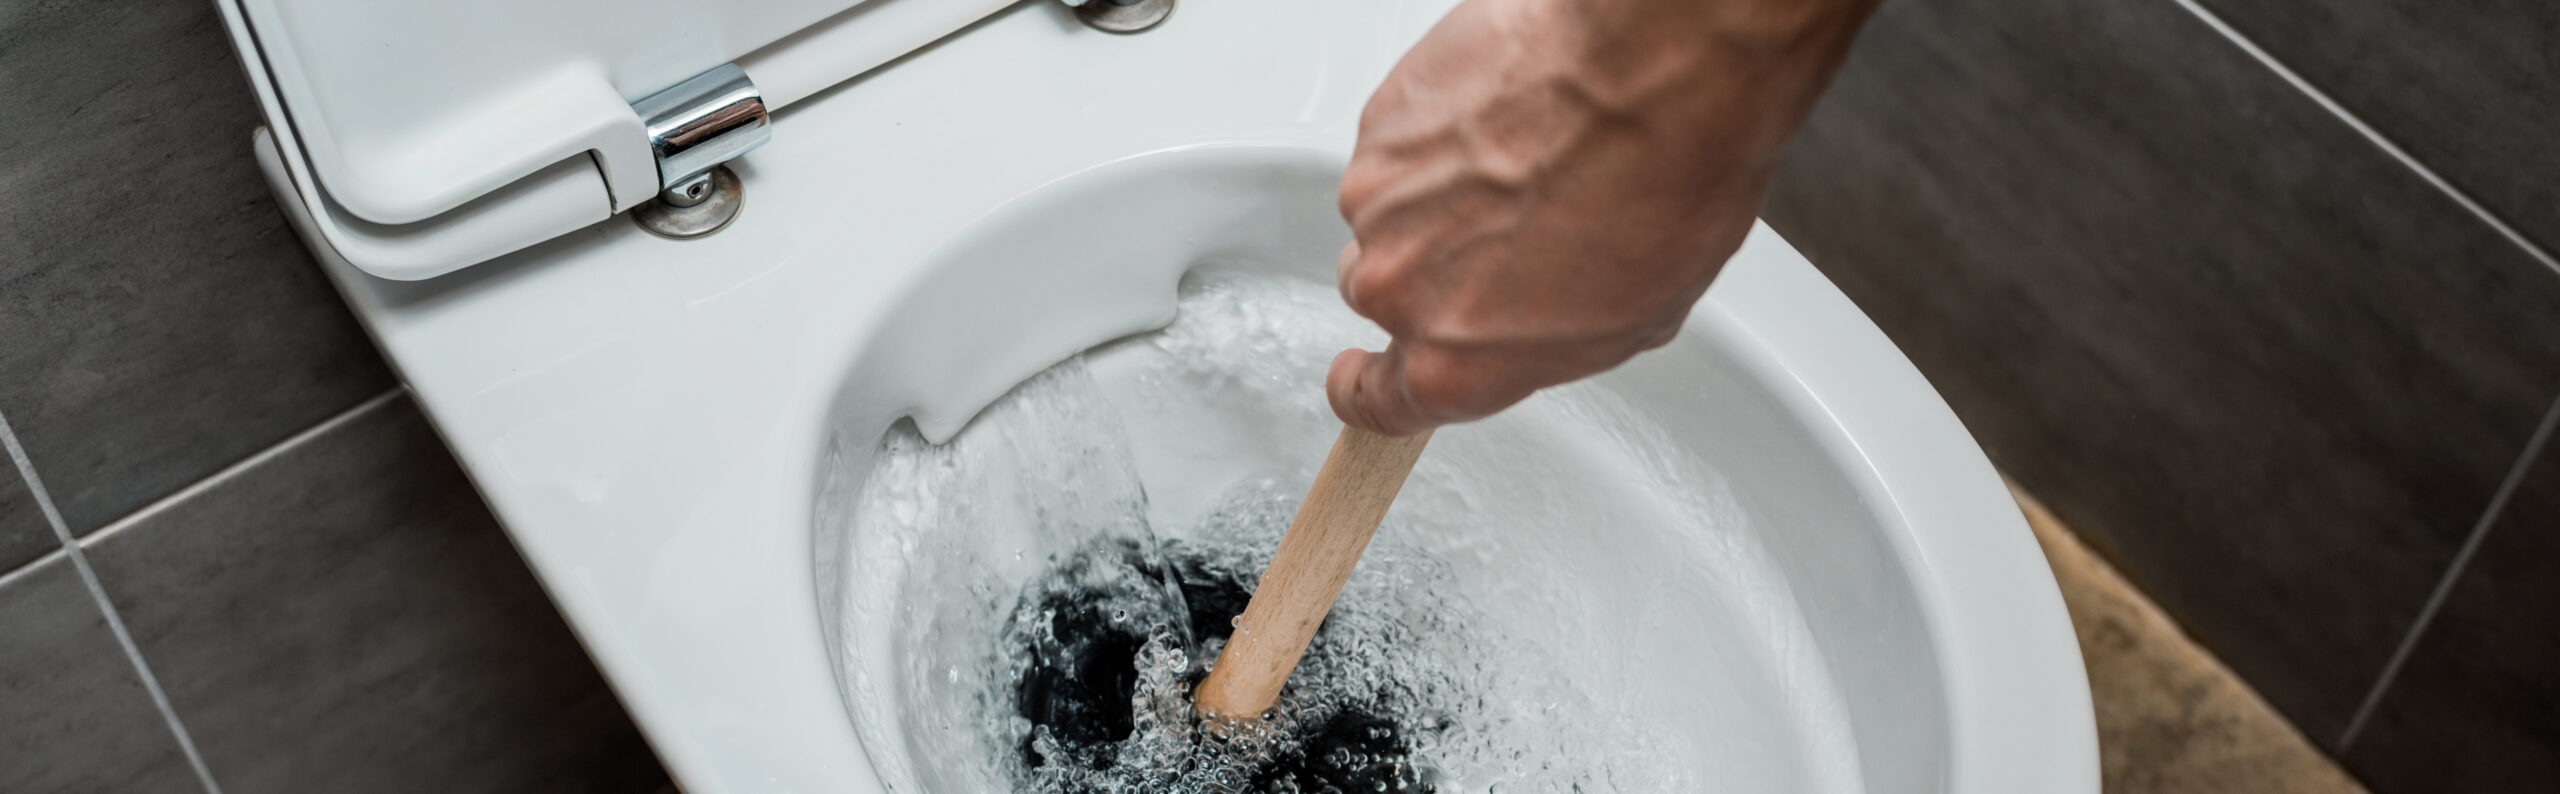 cropped view of plumber using plunger in toilet bowl during flushing in modern restroom